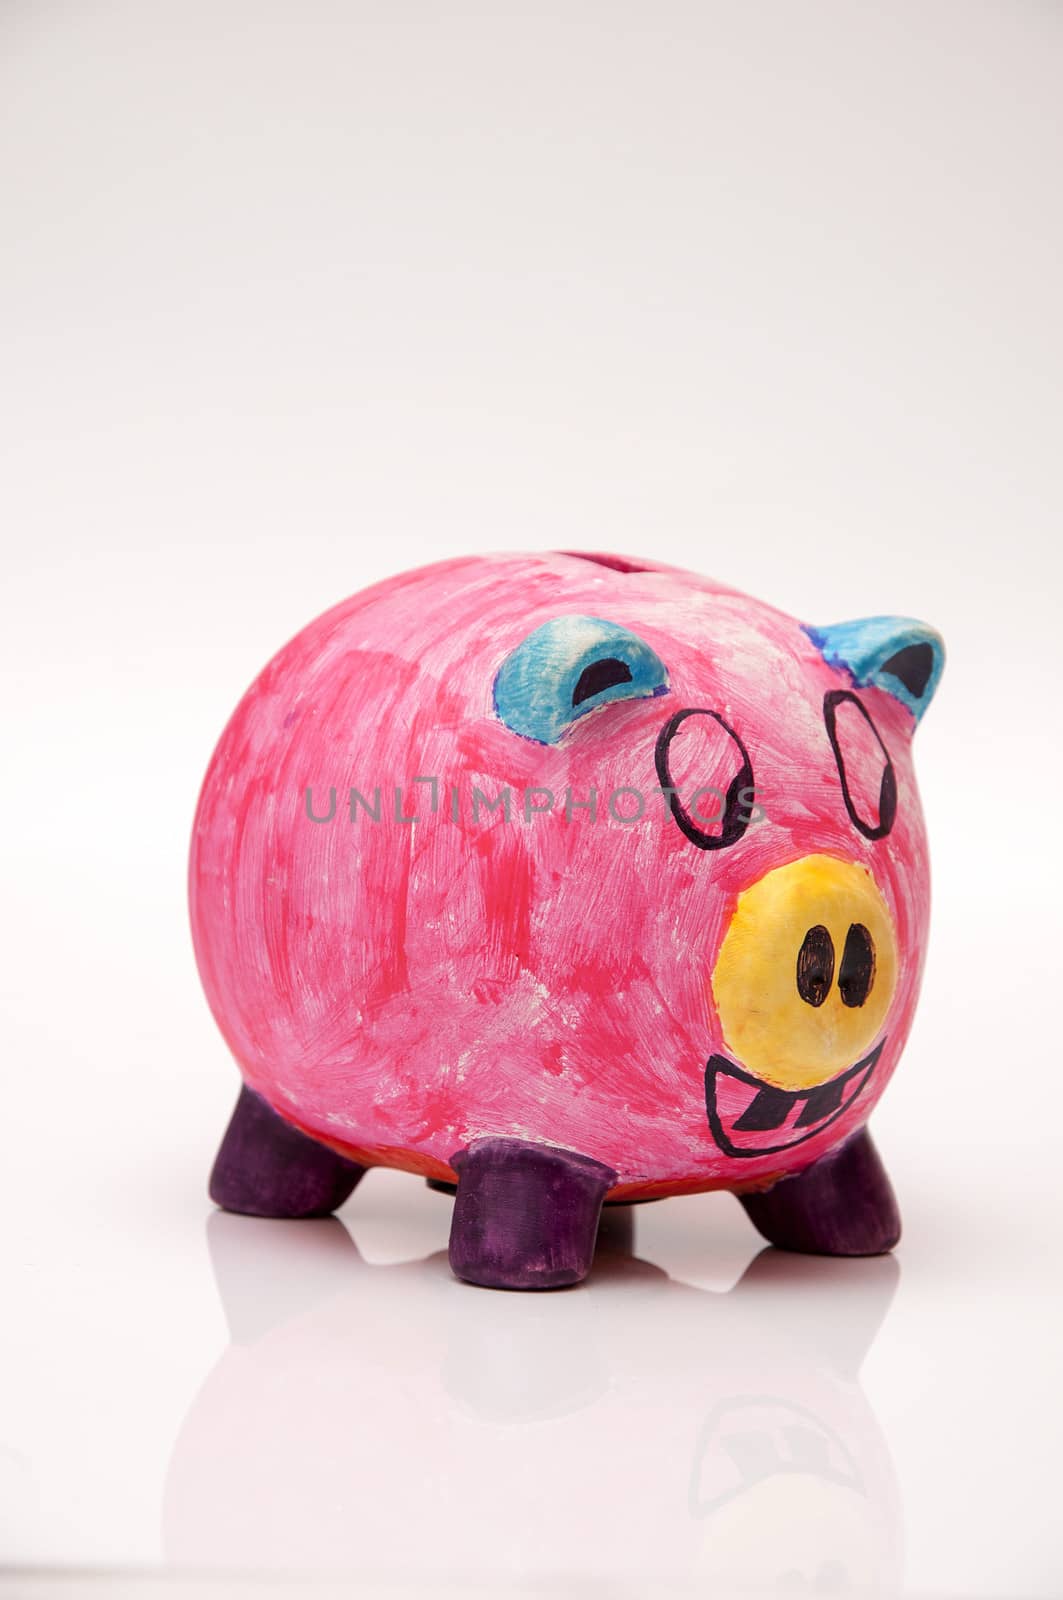 pink piggy bank with eyes and mouth wide